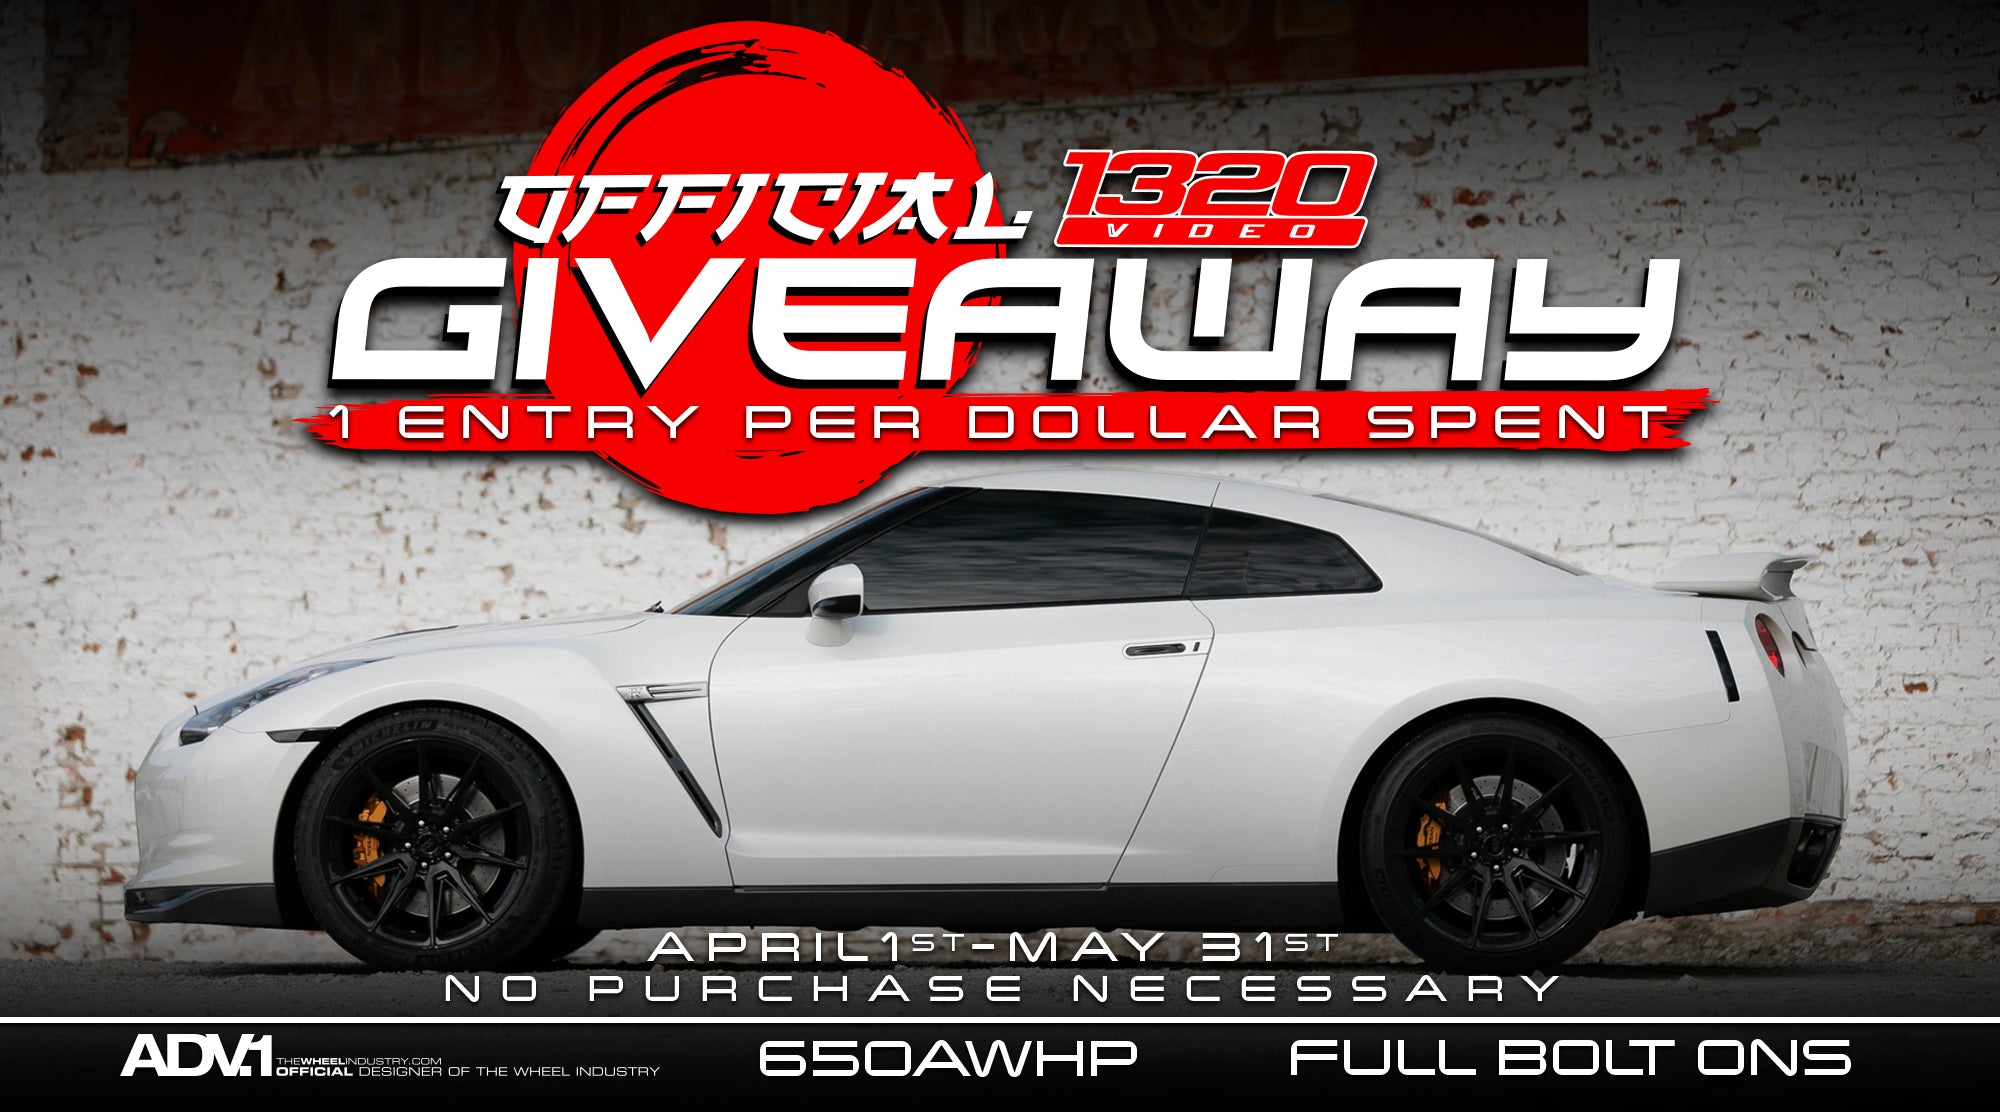 You could win this GT-R with and $15,000 (Official Rules)